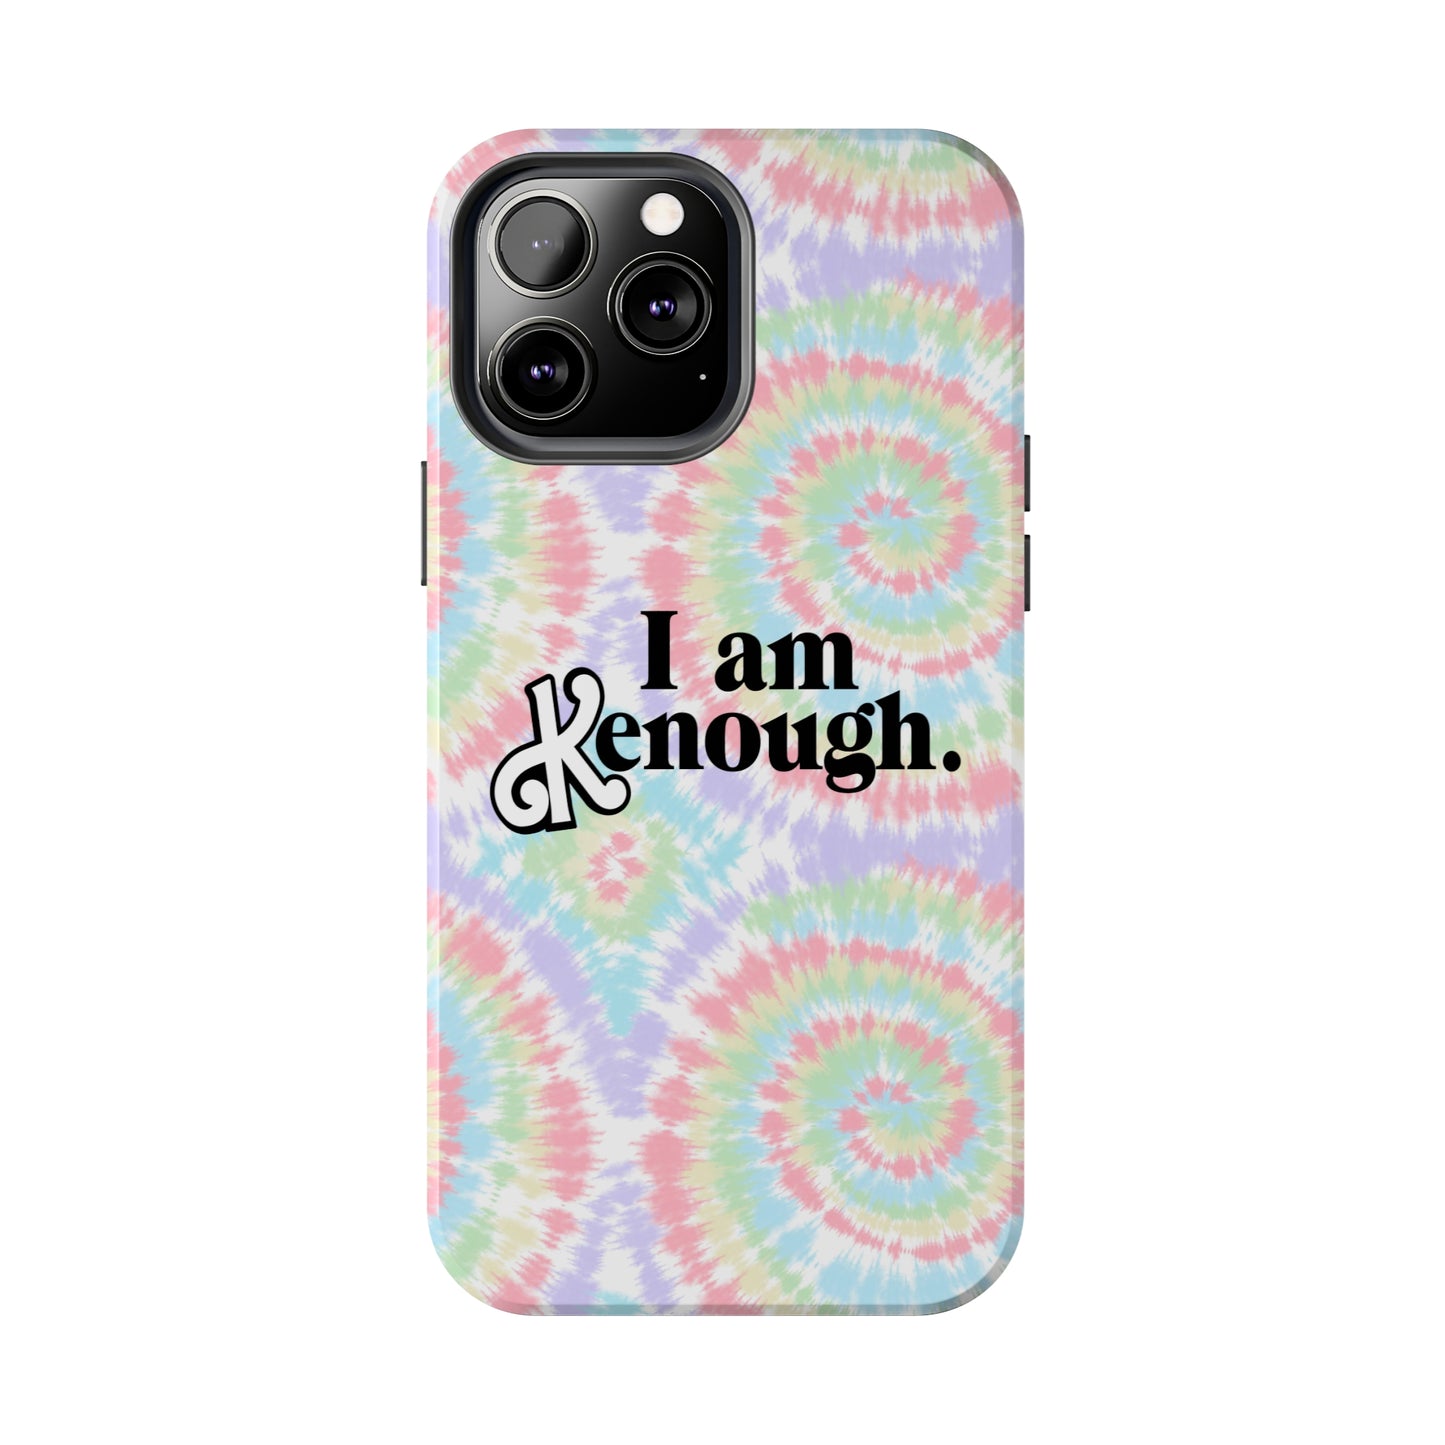 I am Kenough iPhone Case (iPhone 7, 8, X, 11, 12, 13, 14 & more)